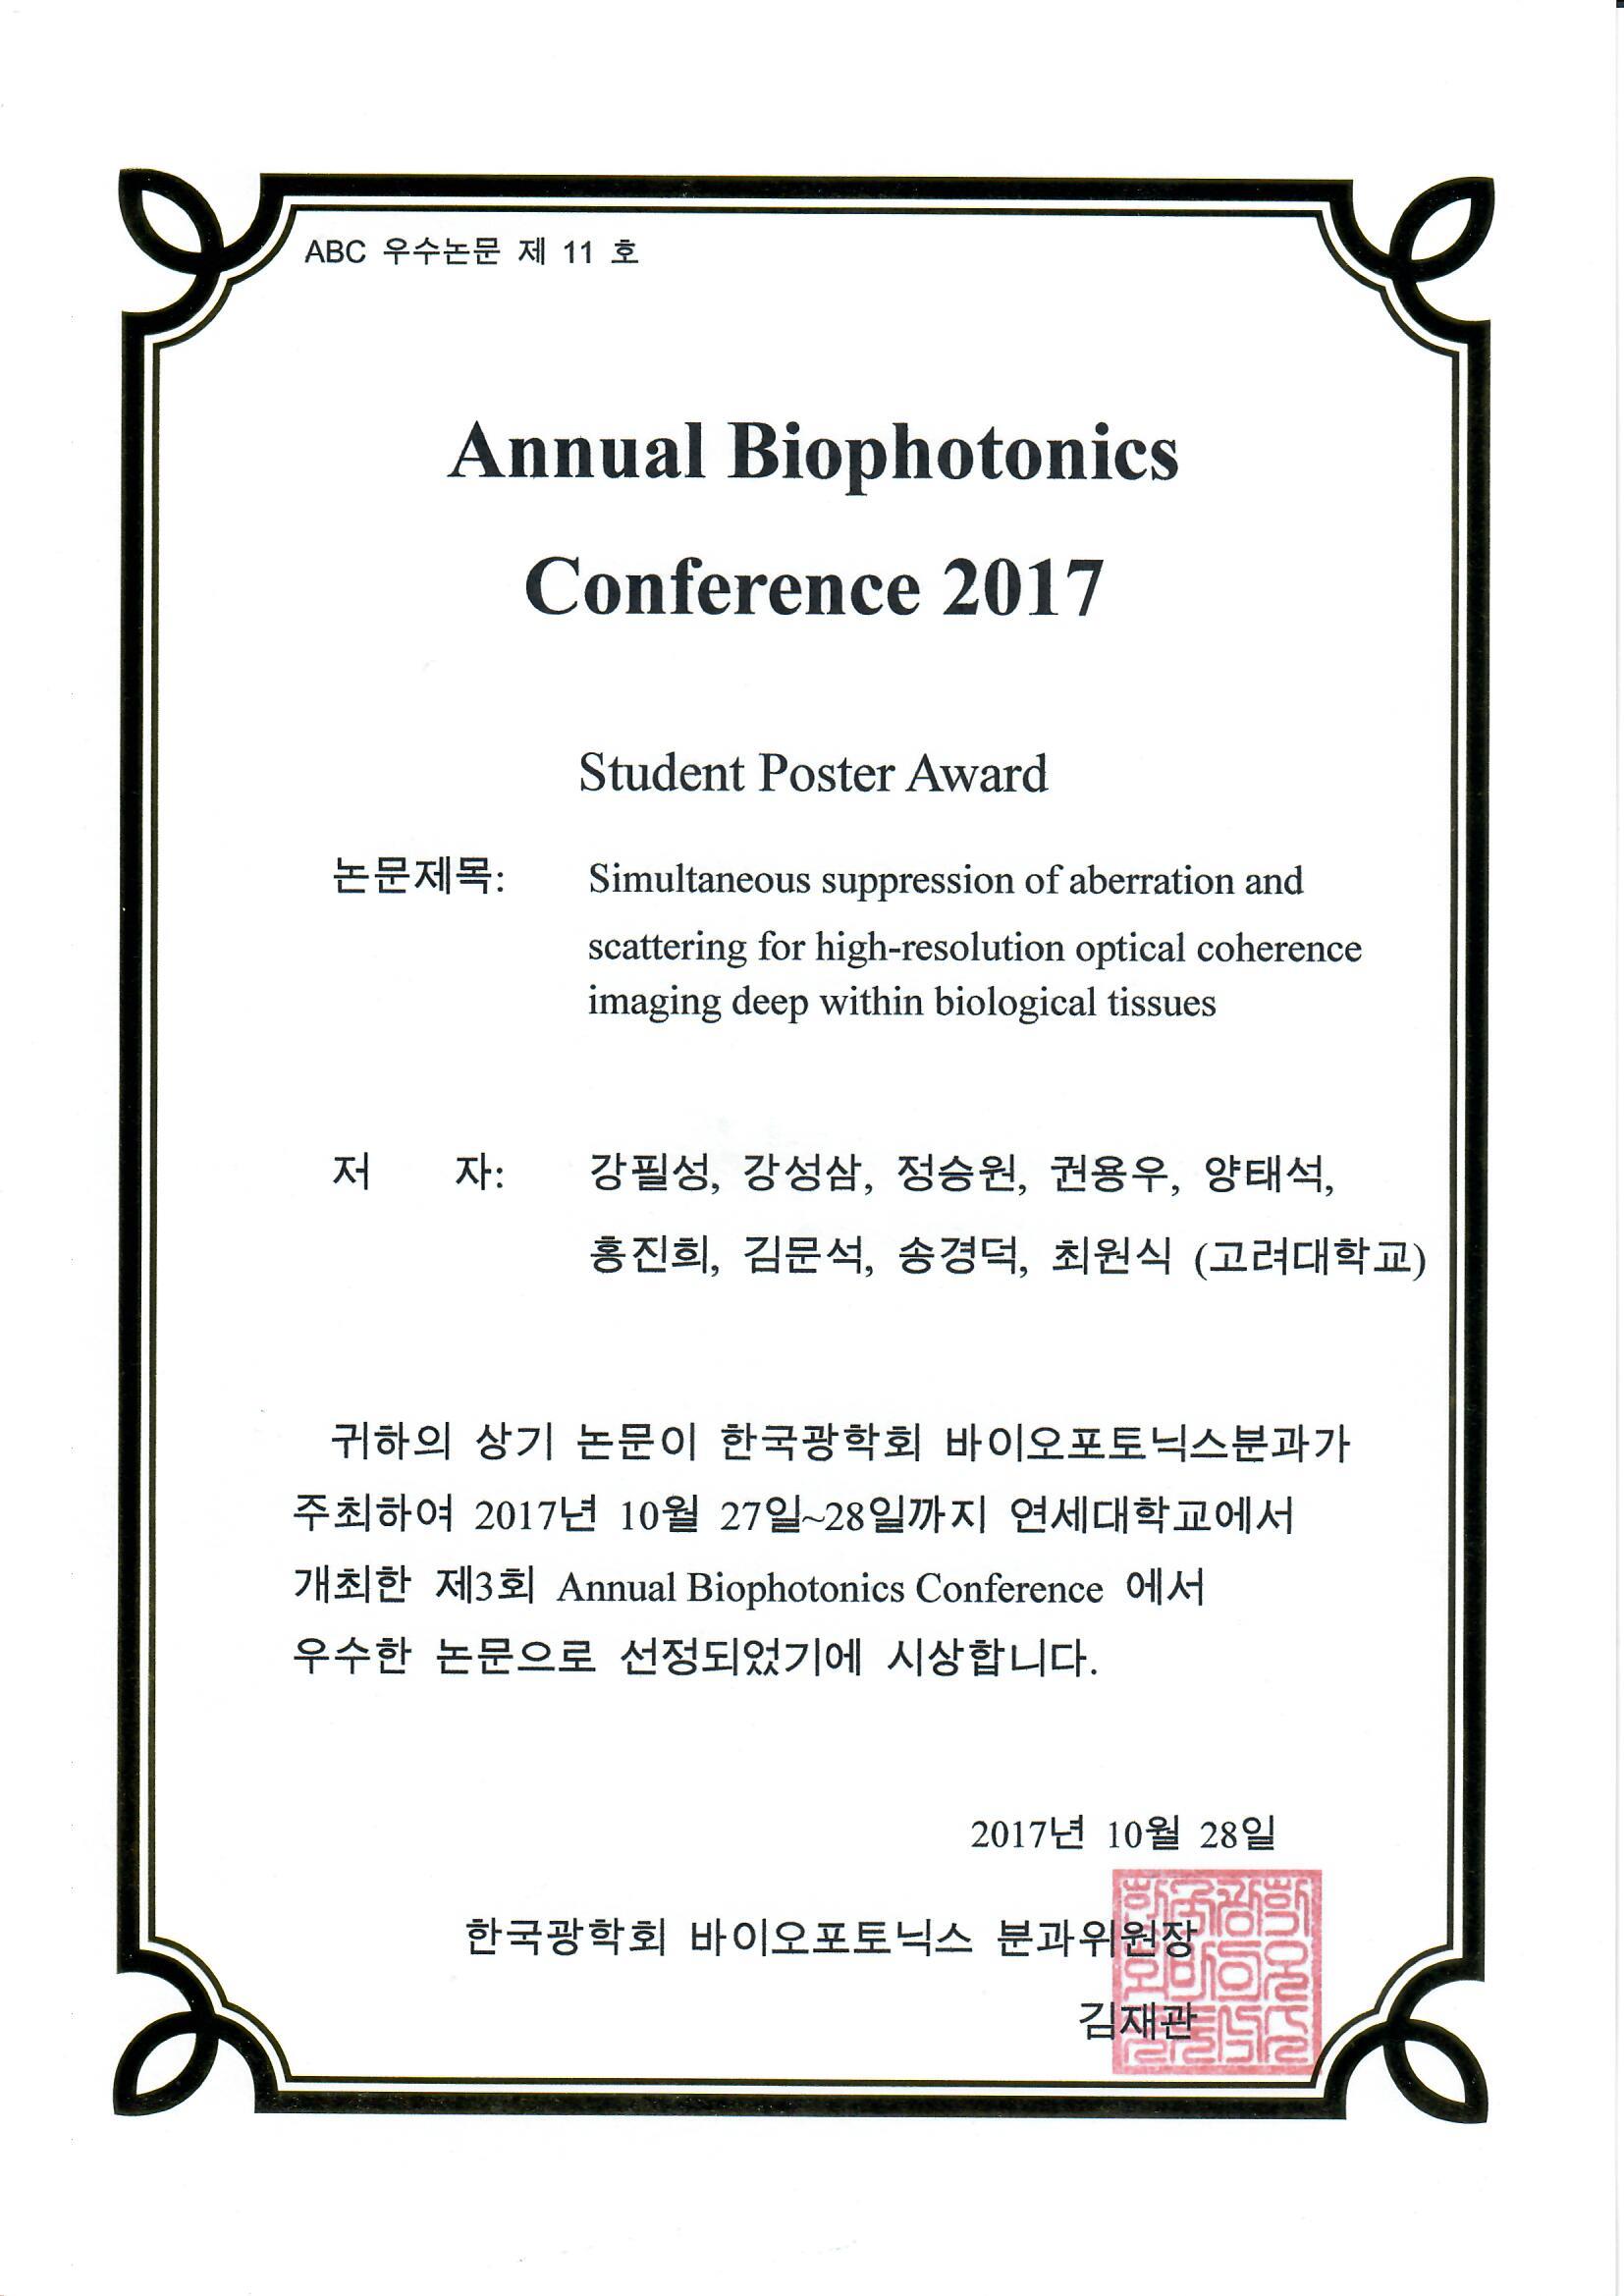 Student Poster Award from ABC 2017(Pilsung Kang) 사진